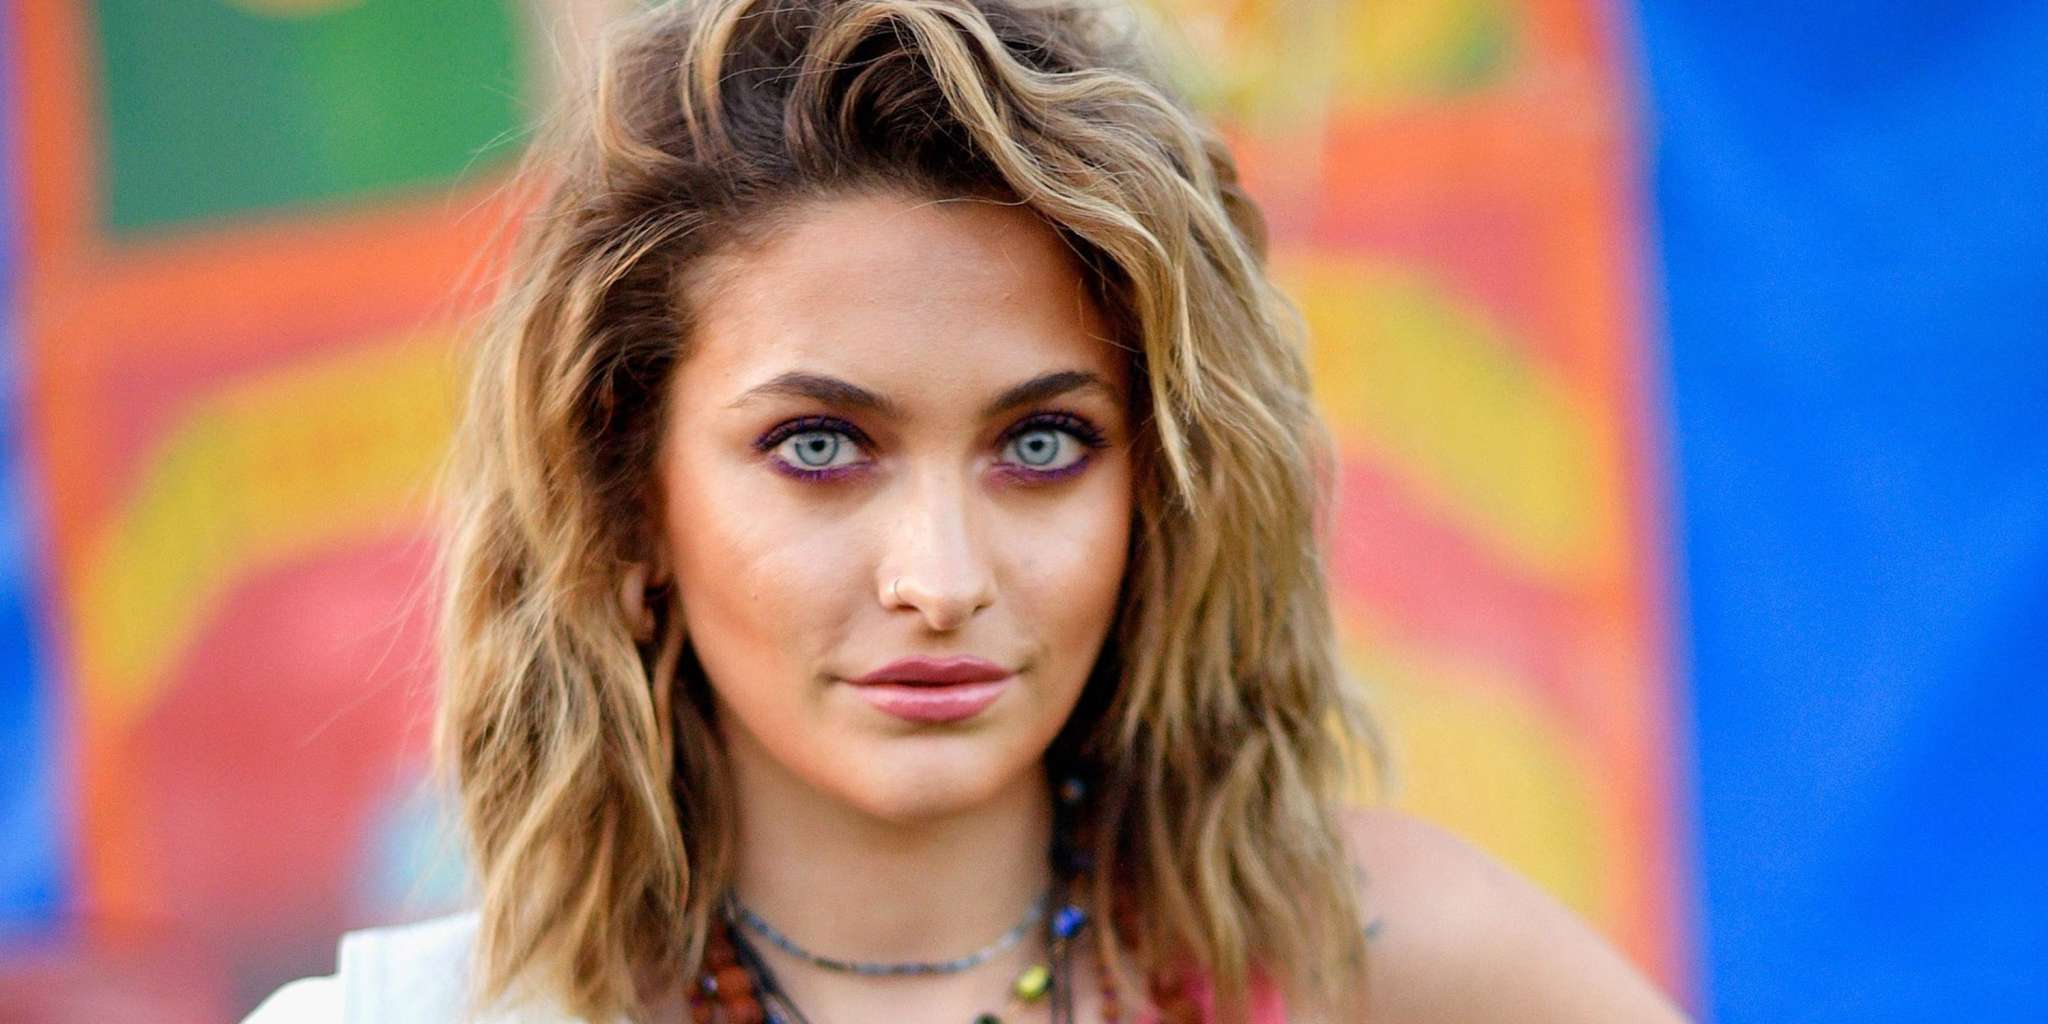 Paris Jackson's 911 Call Surfaces: She's Told To 'Stay Still' Before Her Hospitalization